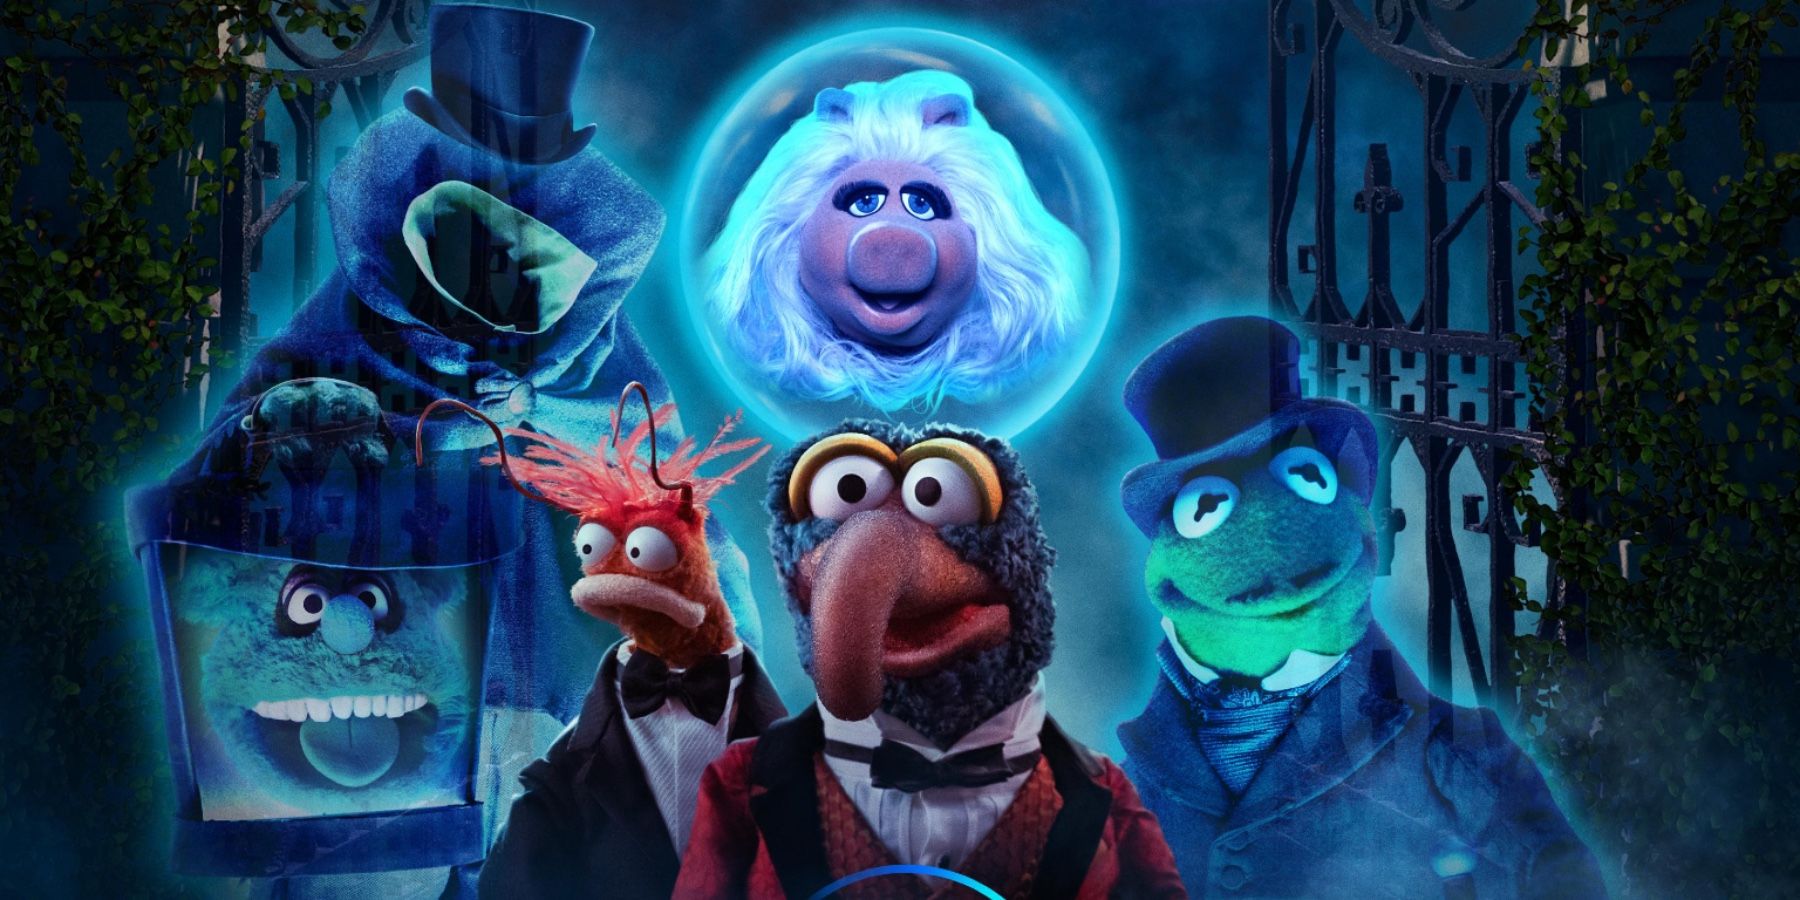 The Muppets Haunted Mansion Disney Plus